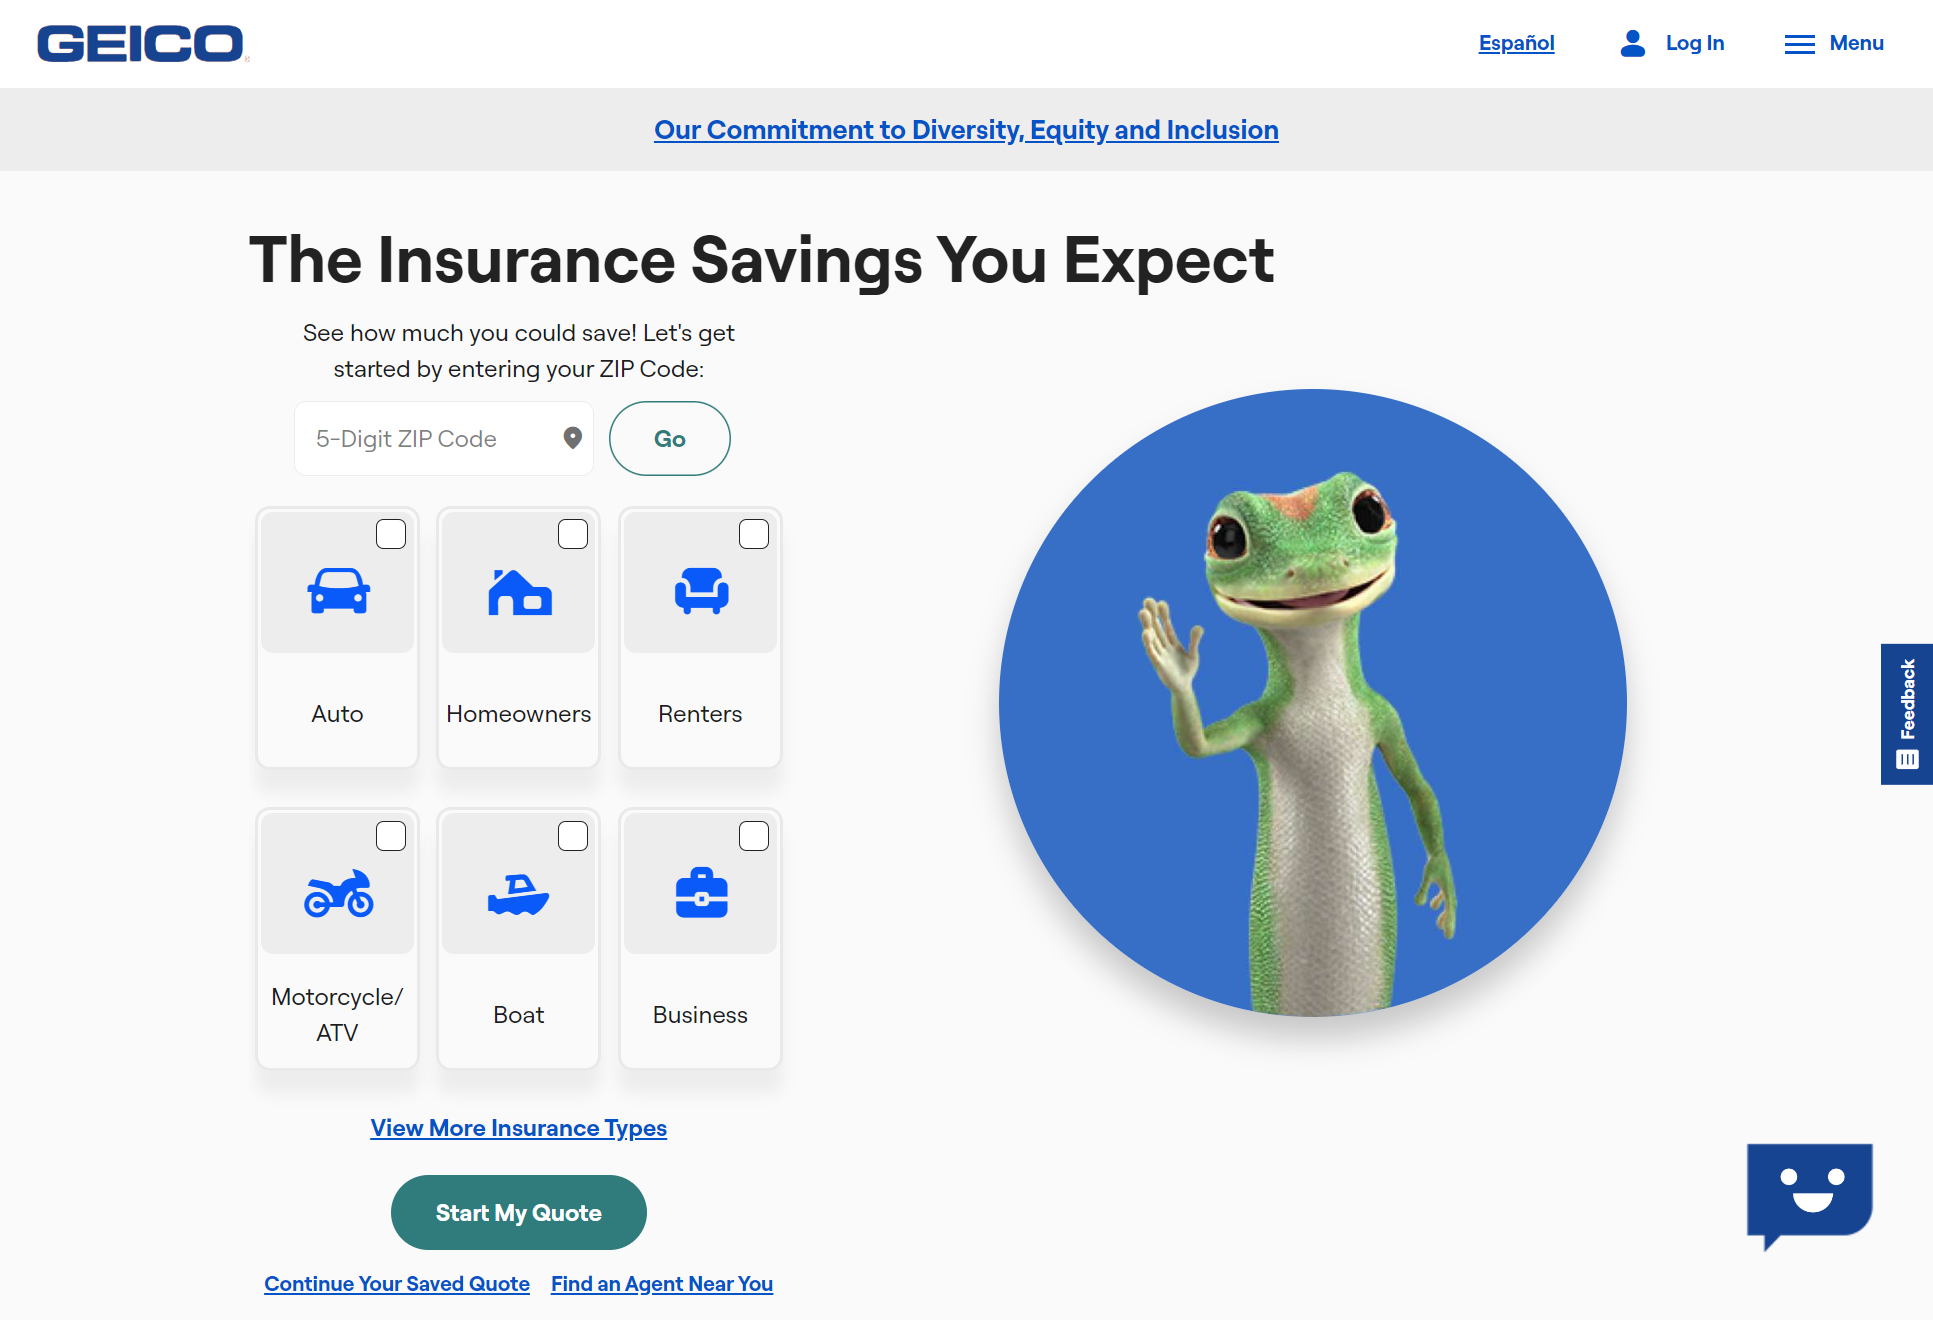 Best Auto Insurance for Emergency Service Workers: Geico